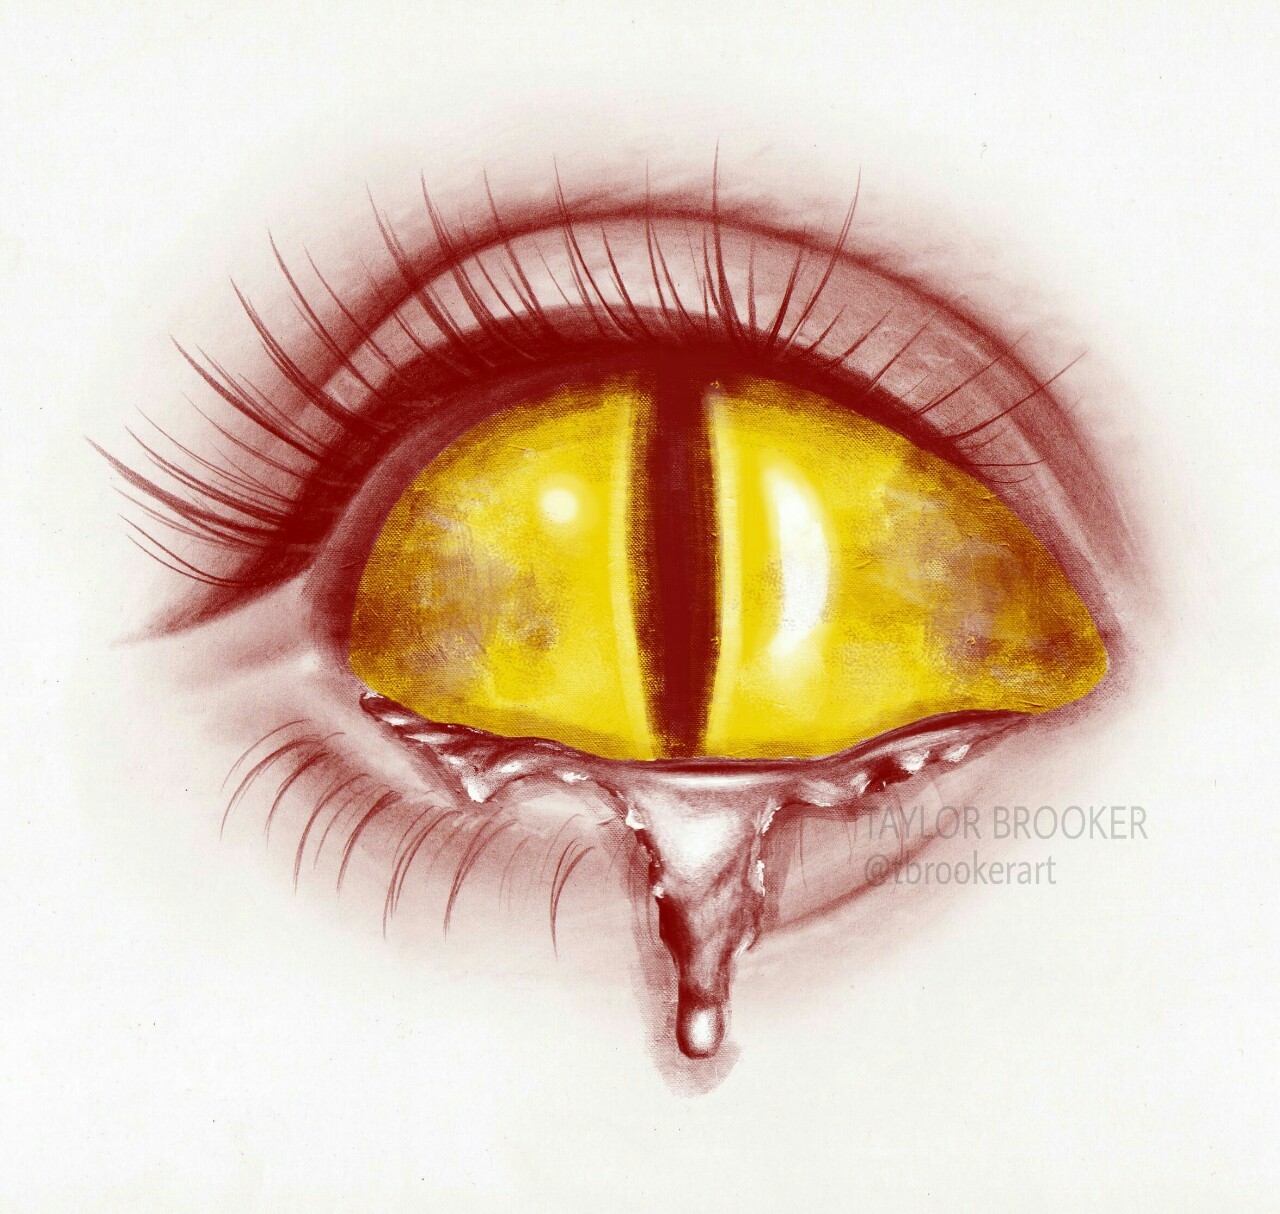 Taylor Brooker Art — Quick creepy eye drawing for our uni degree ...